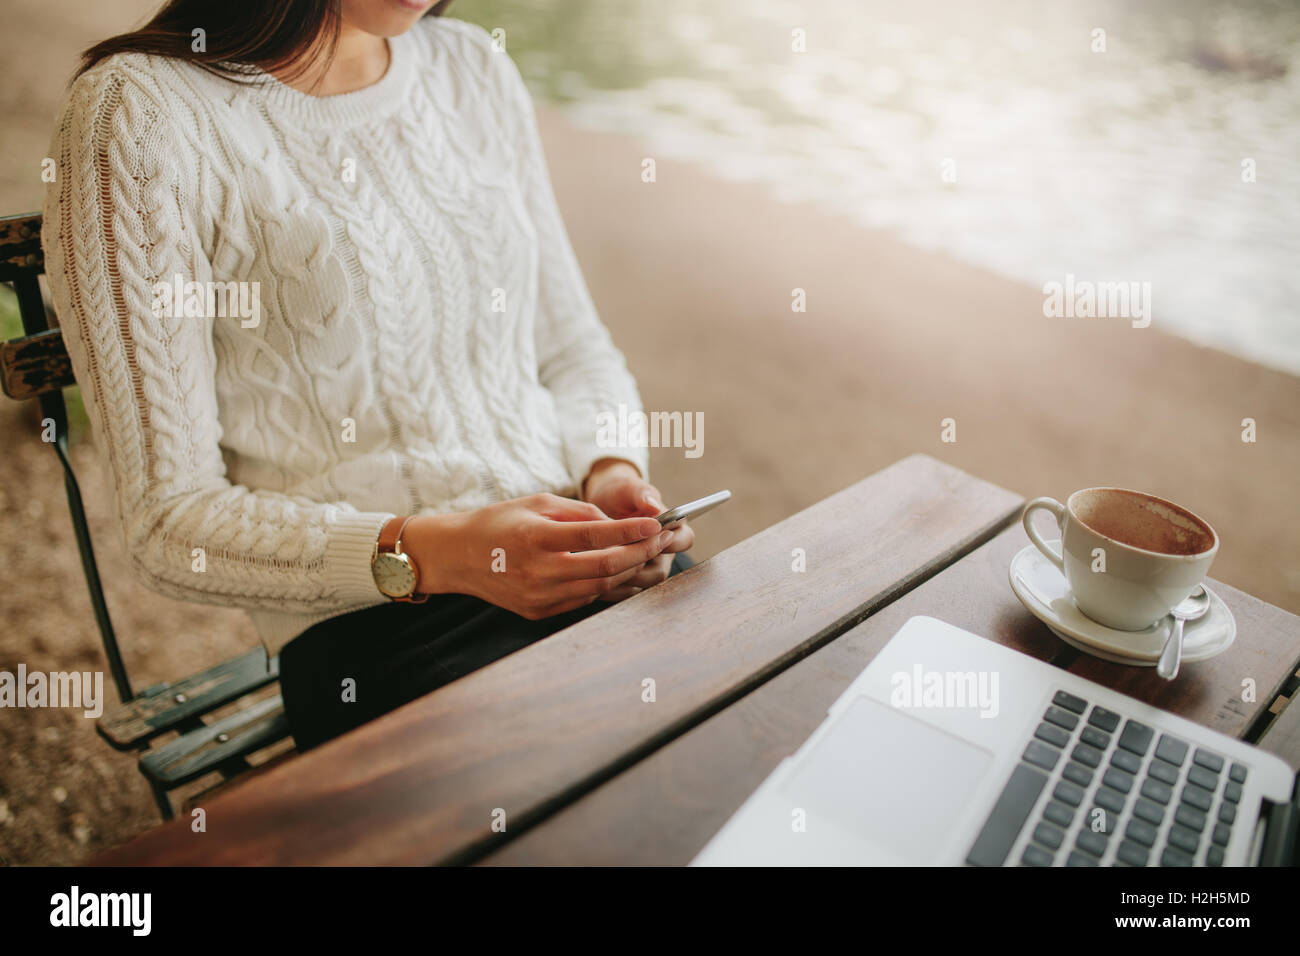 Cropped shot of young woman sitting at outdoor cafe using cellphone. Female sitting at cafe table with laptop and mobile phone i Stock Photo